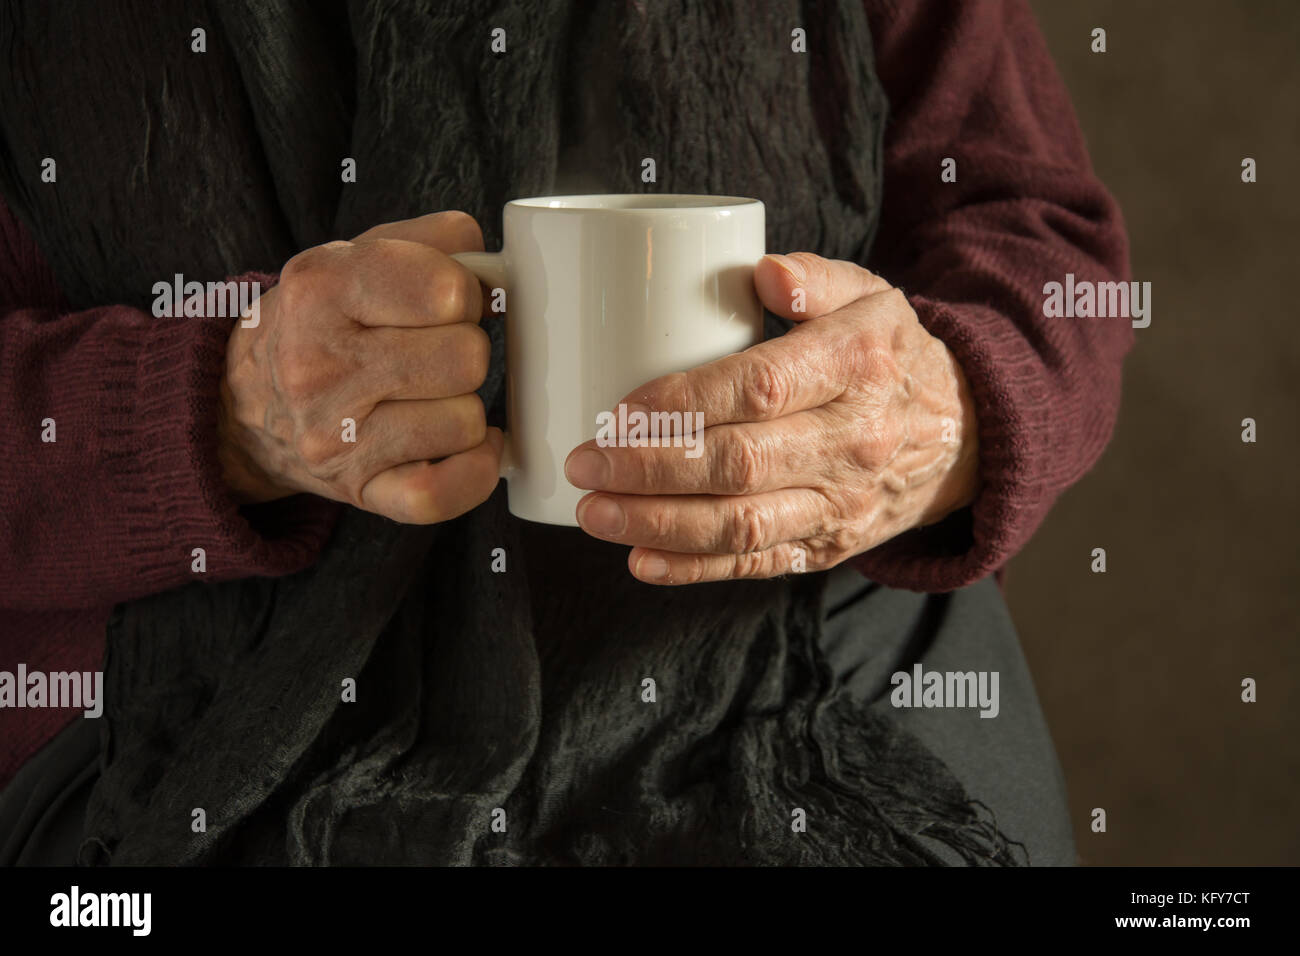 Old woman's wrinkled hands holding a mug with a drink Stock Photo